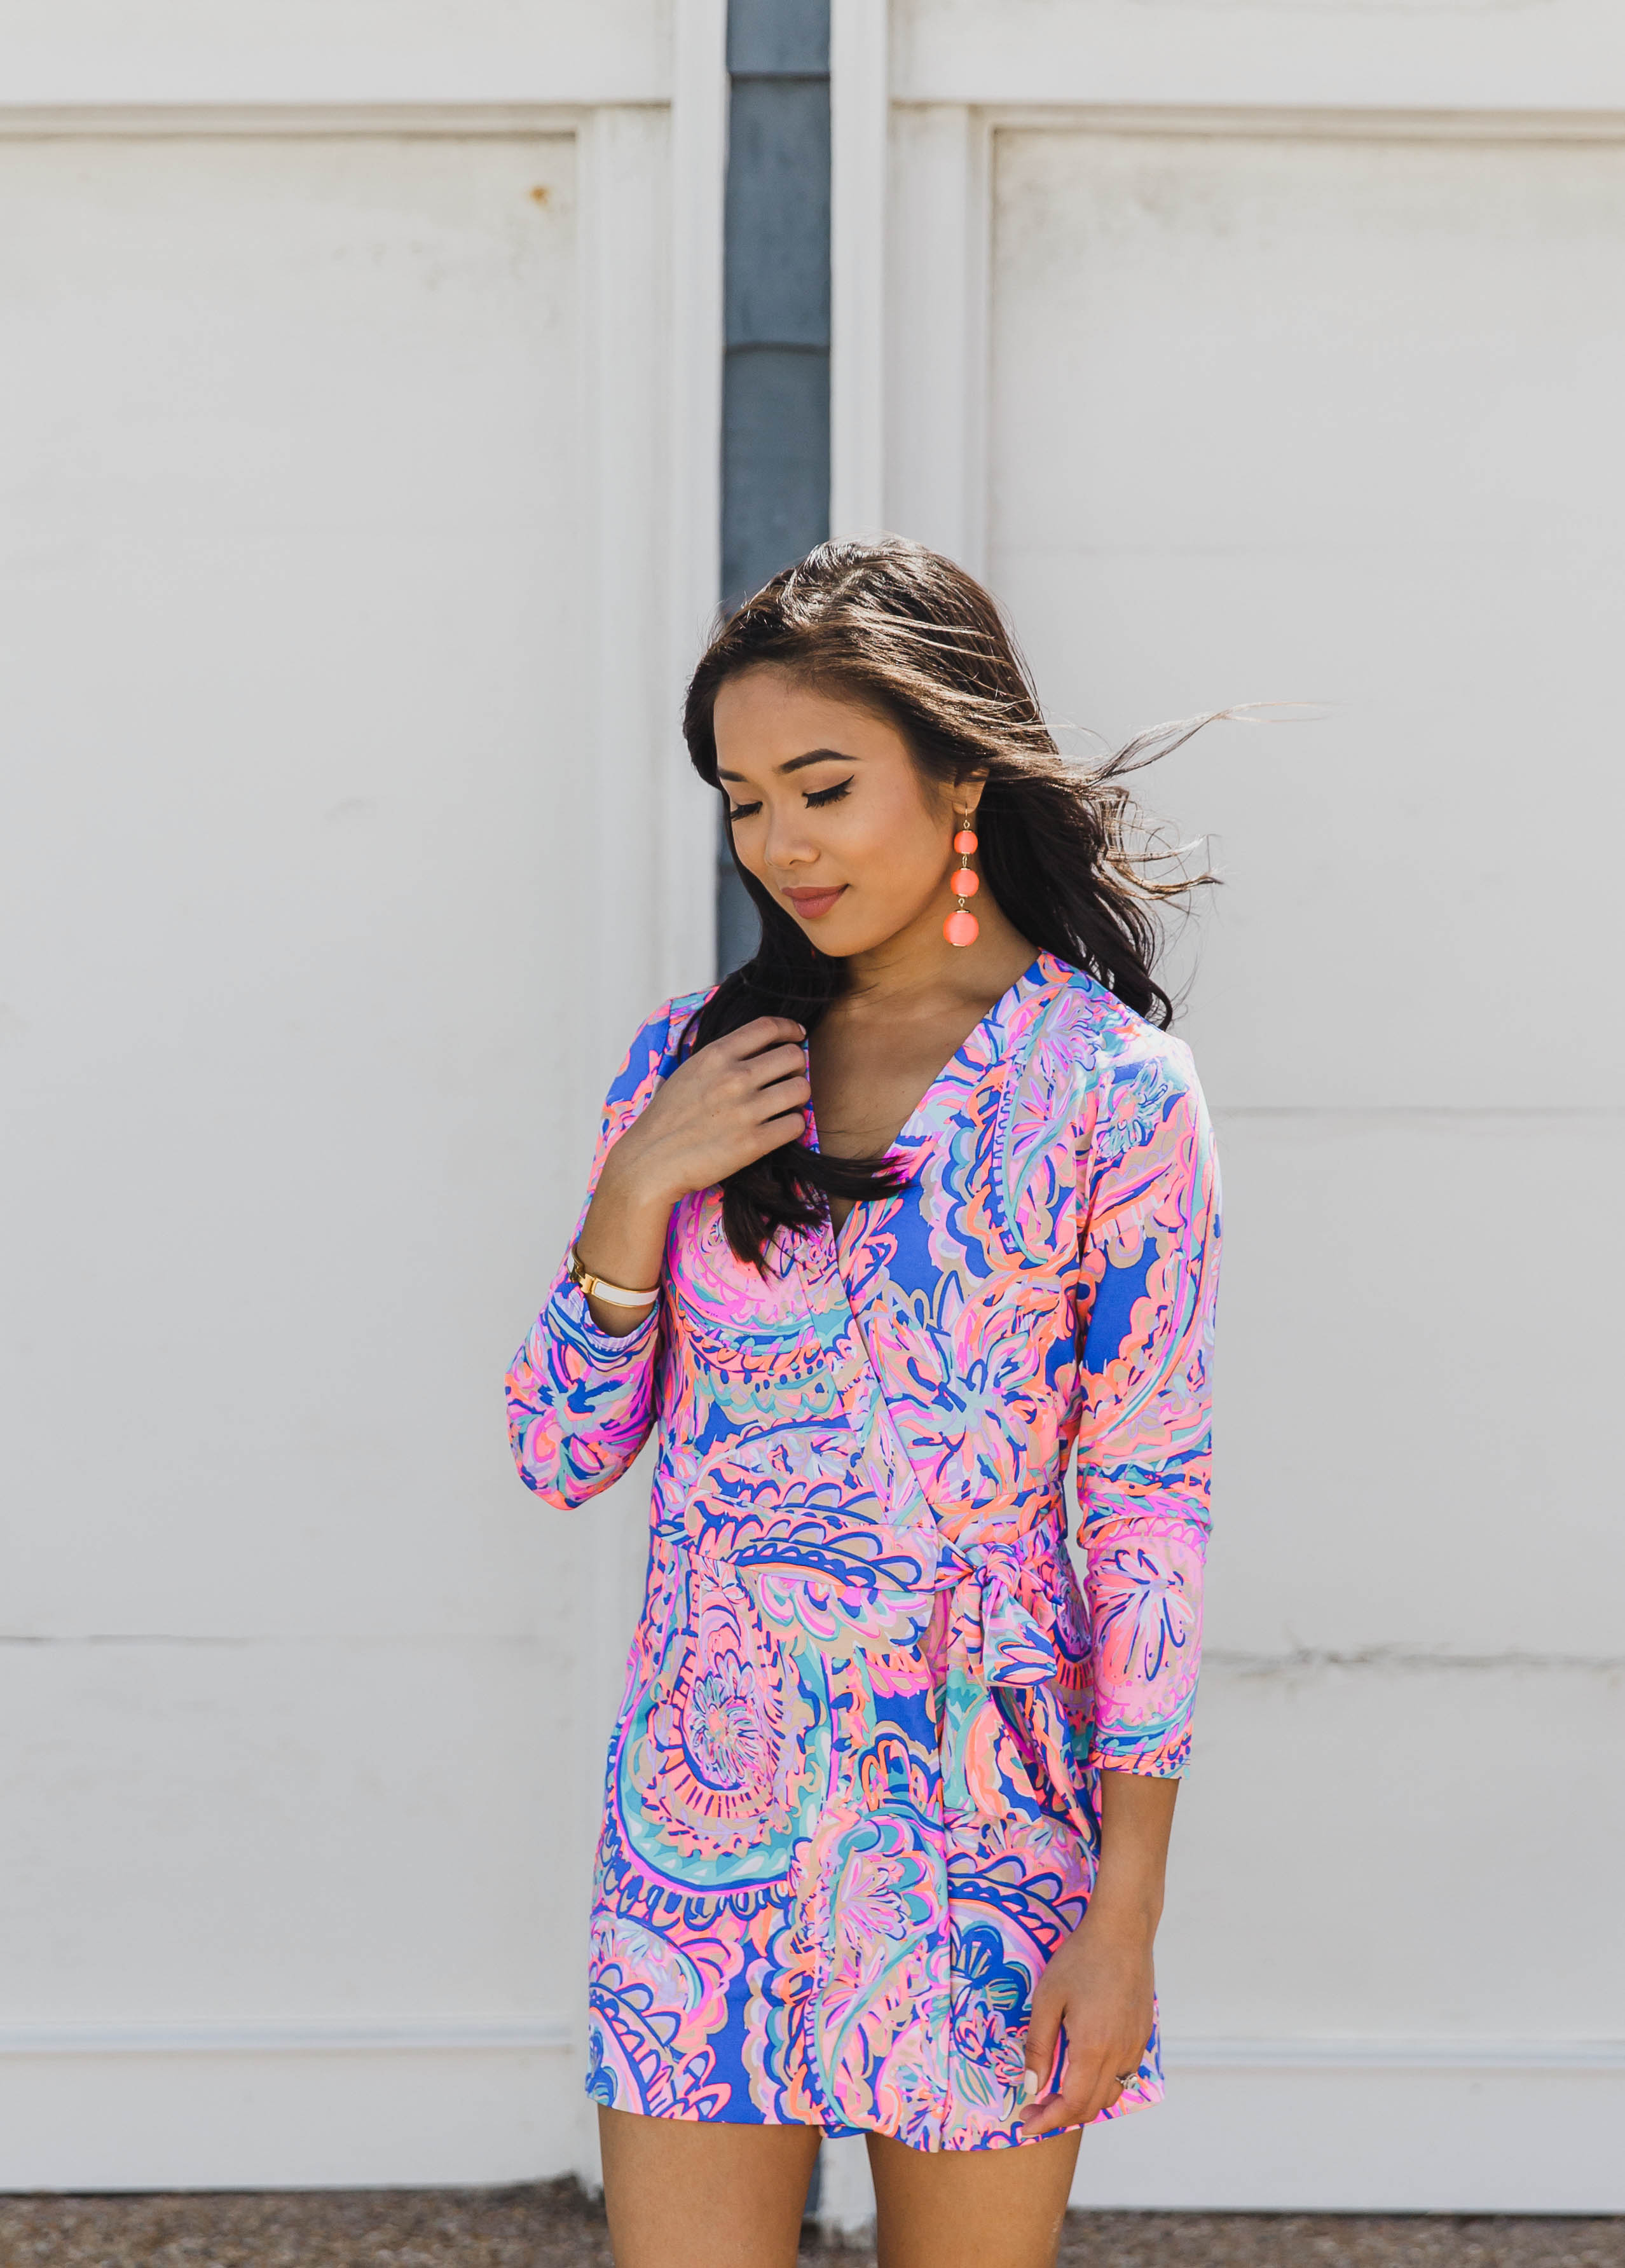 COLOR & CHIC | Colorful romper for summer